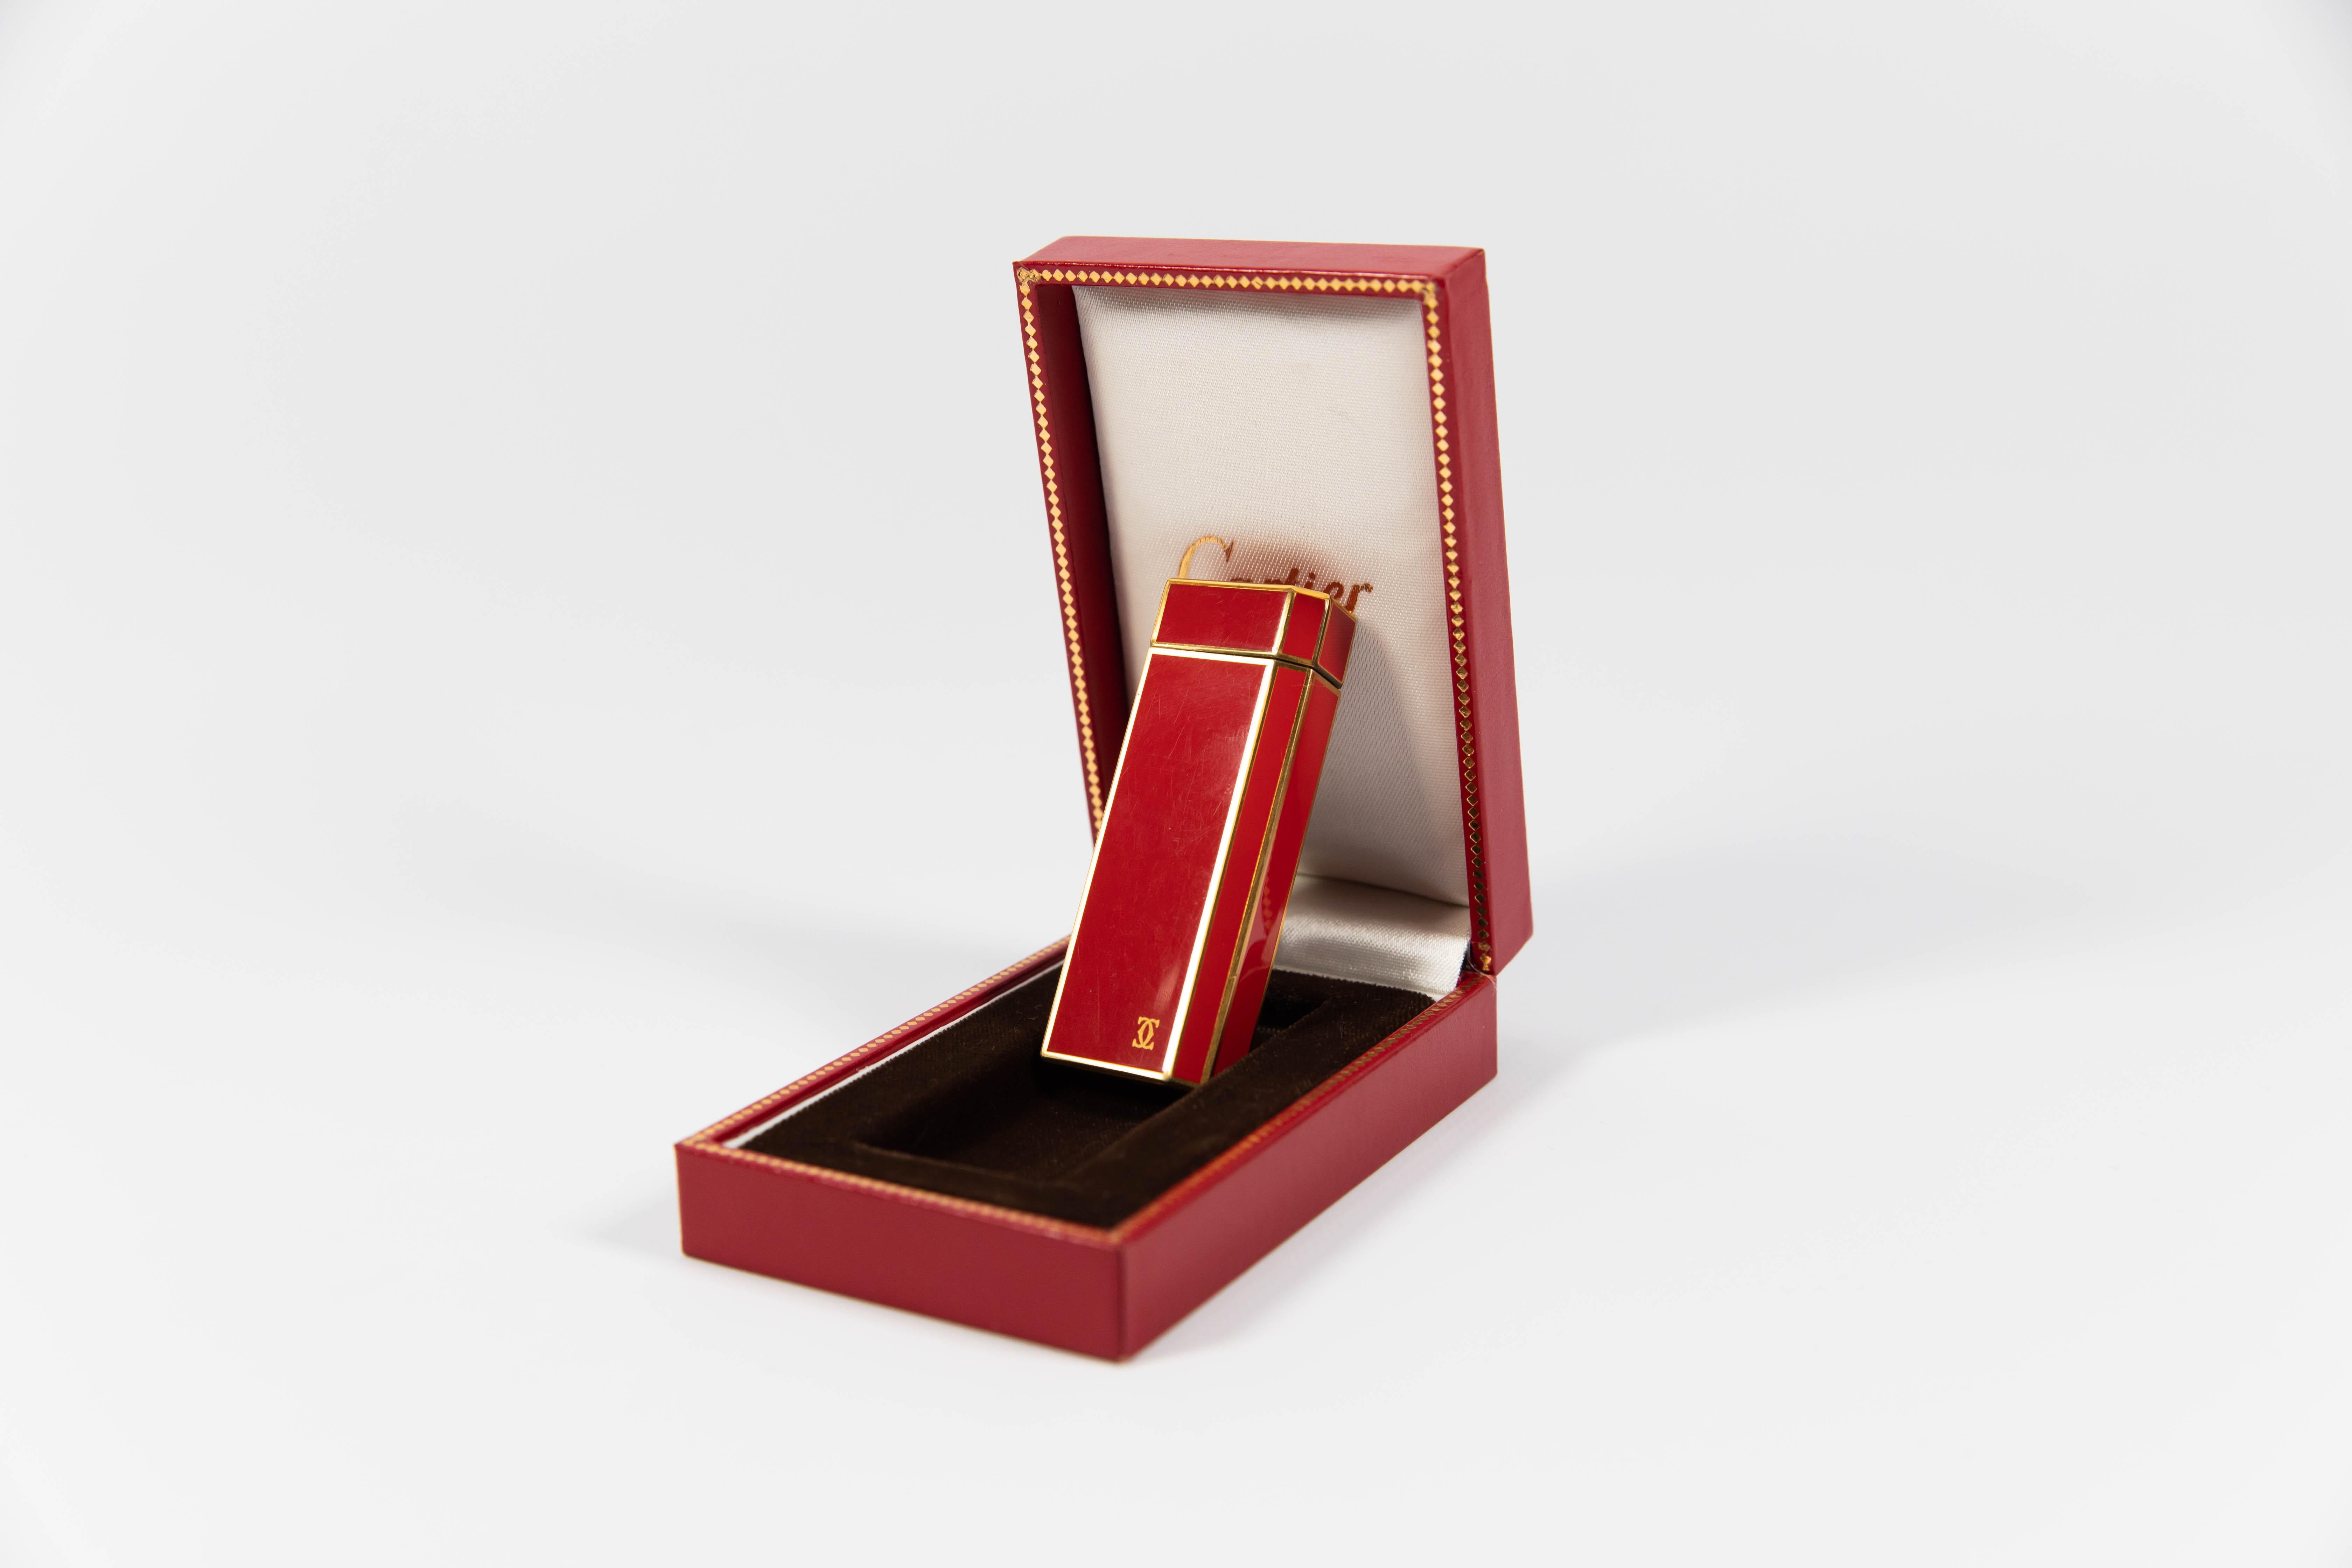 Vintage Red Lacquer Gold Plated Cartier Les Must Pentagon lighter

This Red Lacquer Cartier Les must lighter with gold-plated accents is in almost perfect condition. Fully functional, sparks excellent, and lights every time. Approximately sold in